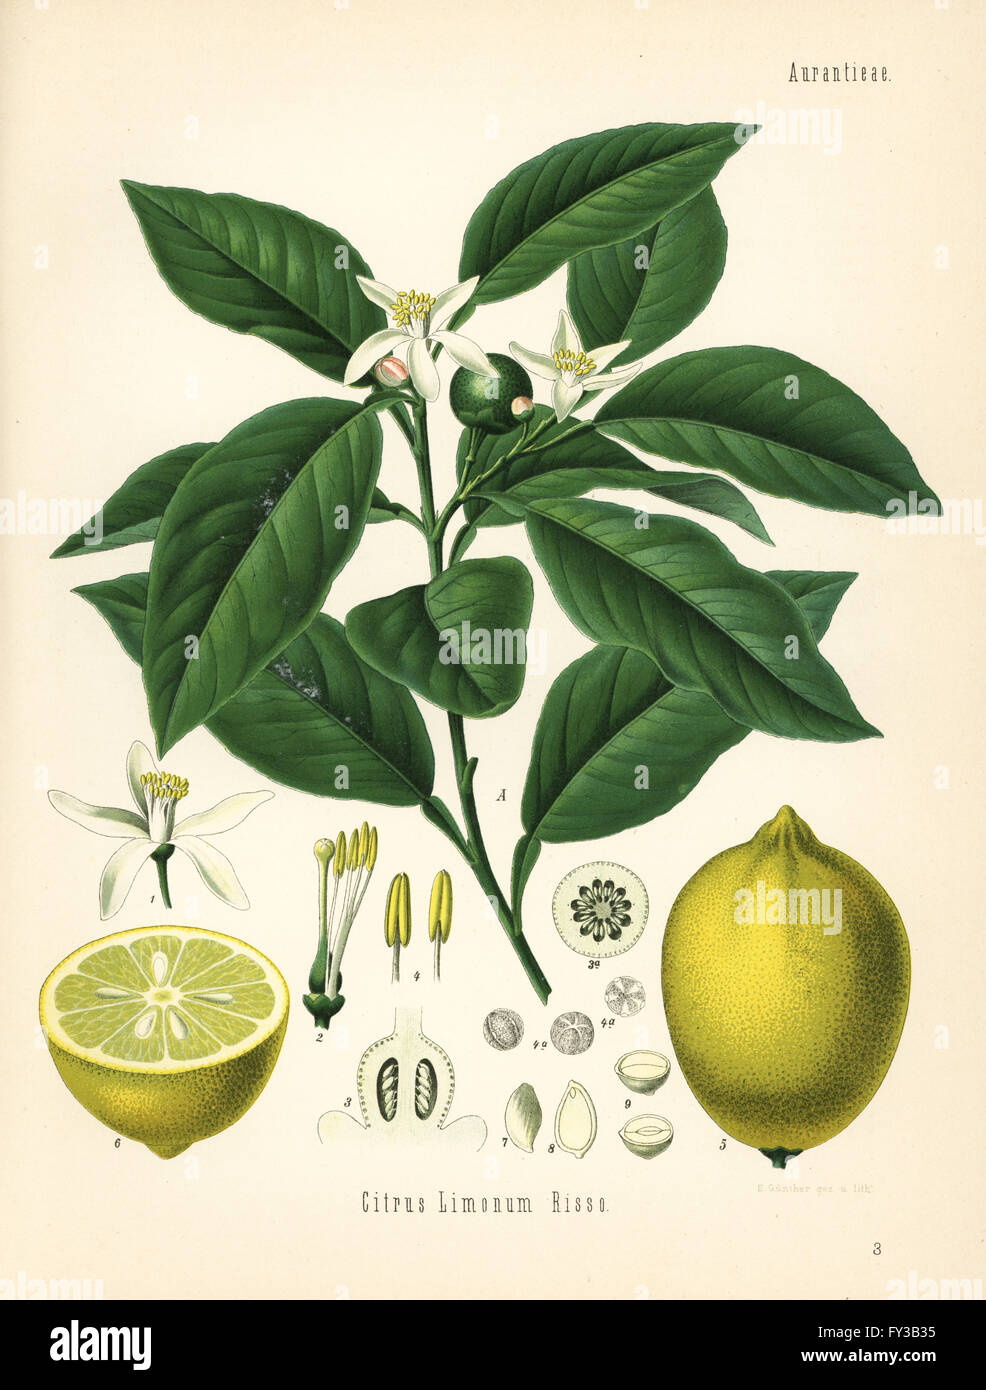 Lemon tree and fruit, Citrus limon (Citrus limonum). Chromolithograph by E. Gunther after a botanical illustration from Hermann Adolph Koehler's Medicinal Plants, edited by Gustav Pabst, Koehler, Germany, 1887. Stock Photo